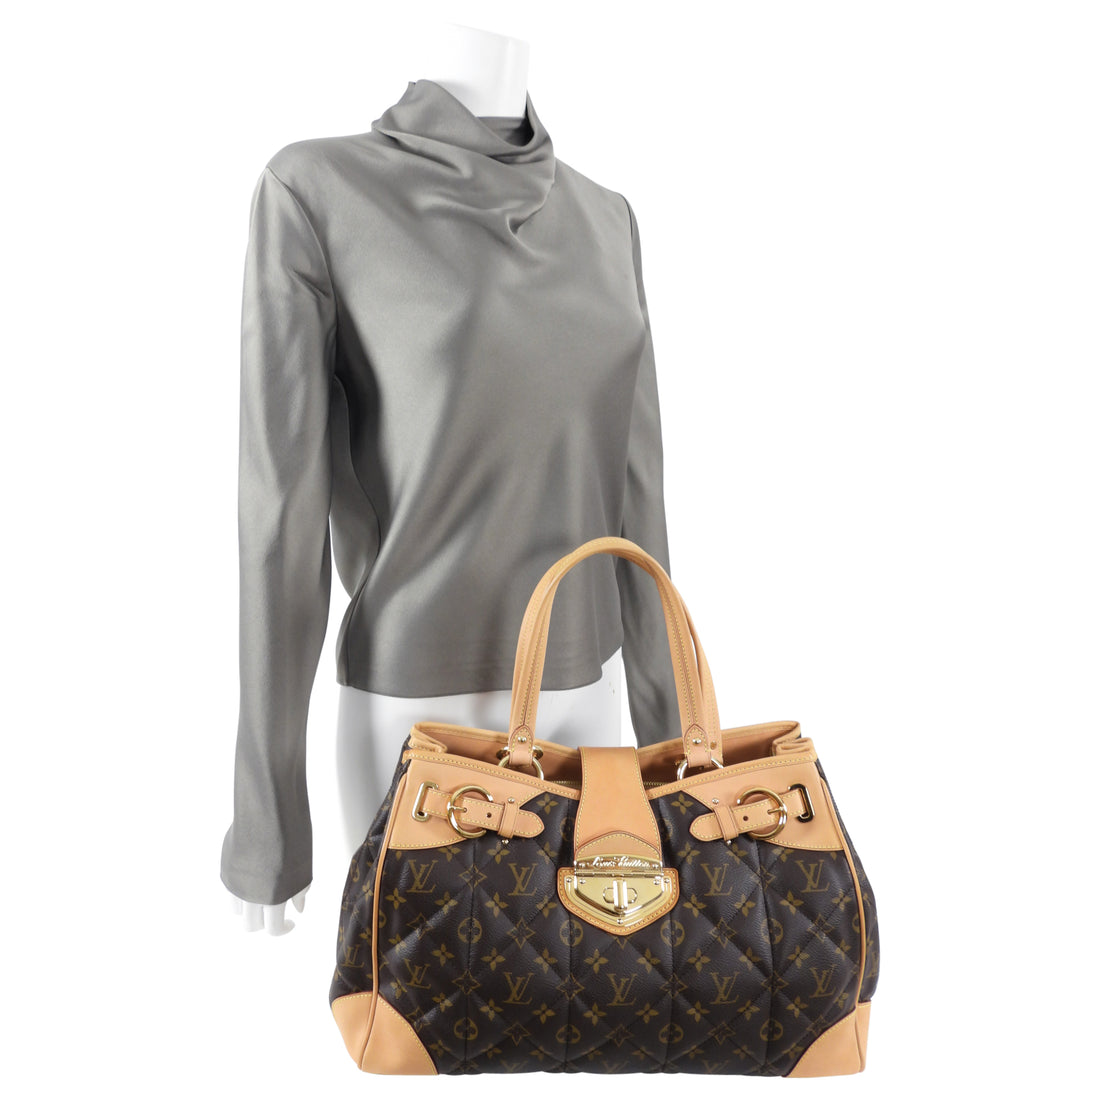 Lots of details on the Louis Vuitton Etoile Shoppers Tote. The quiltin